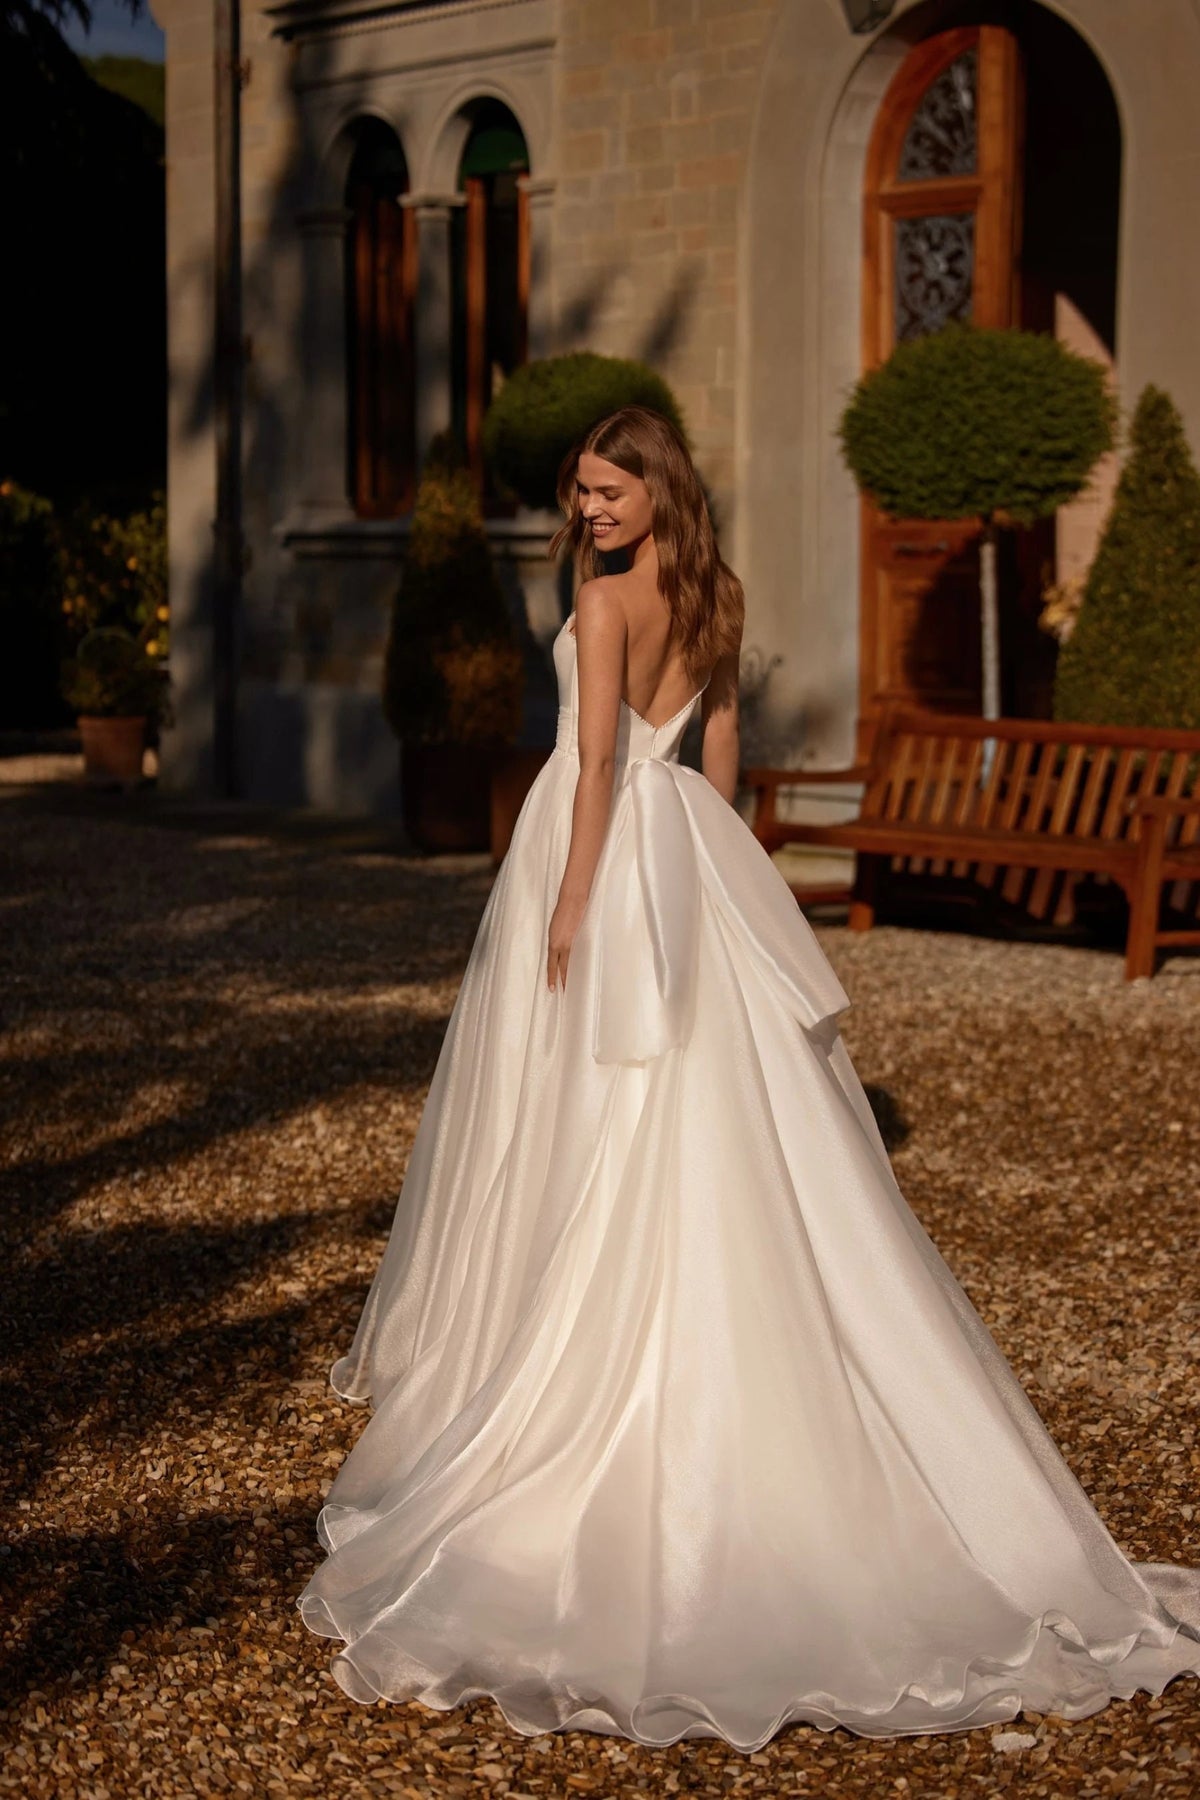 Exquisite Ivory Aline Wedding Dress Bridal Gown Organza with Deep Neckline Pearl Details Open Back Removable Back Bow